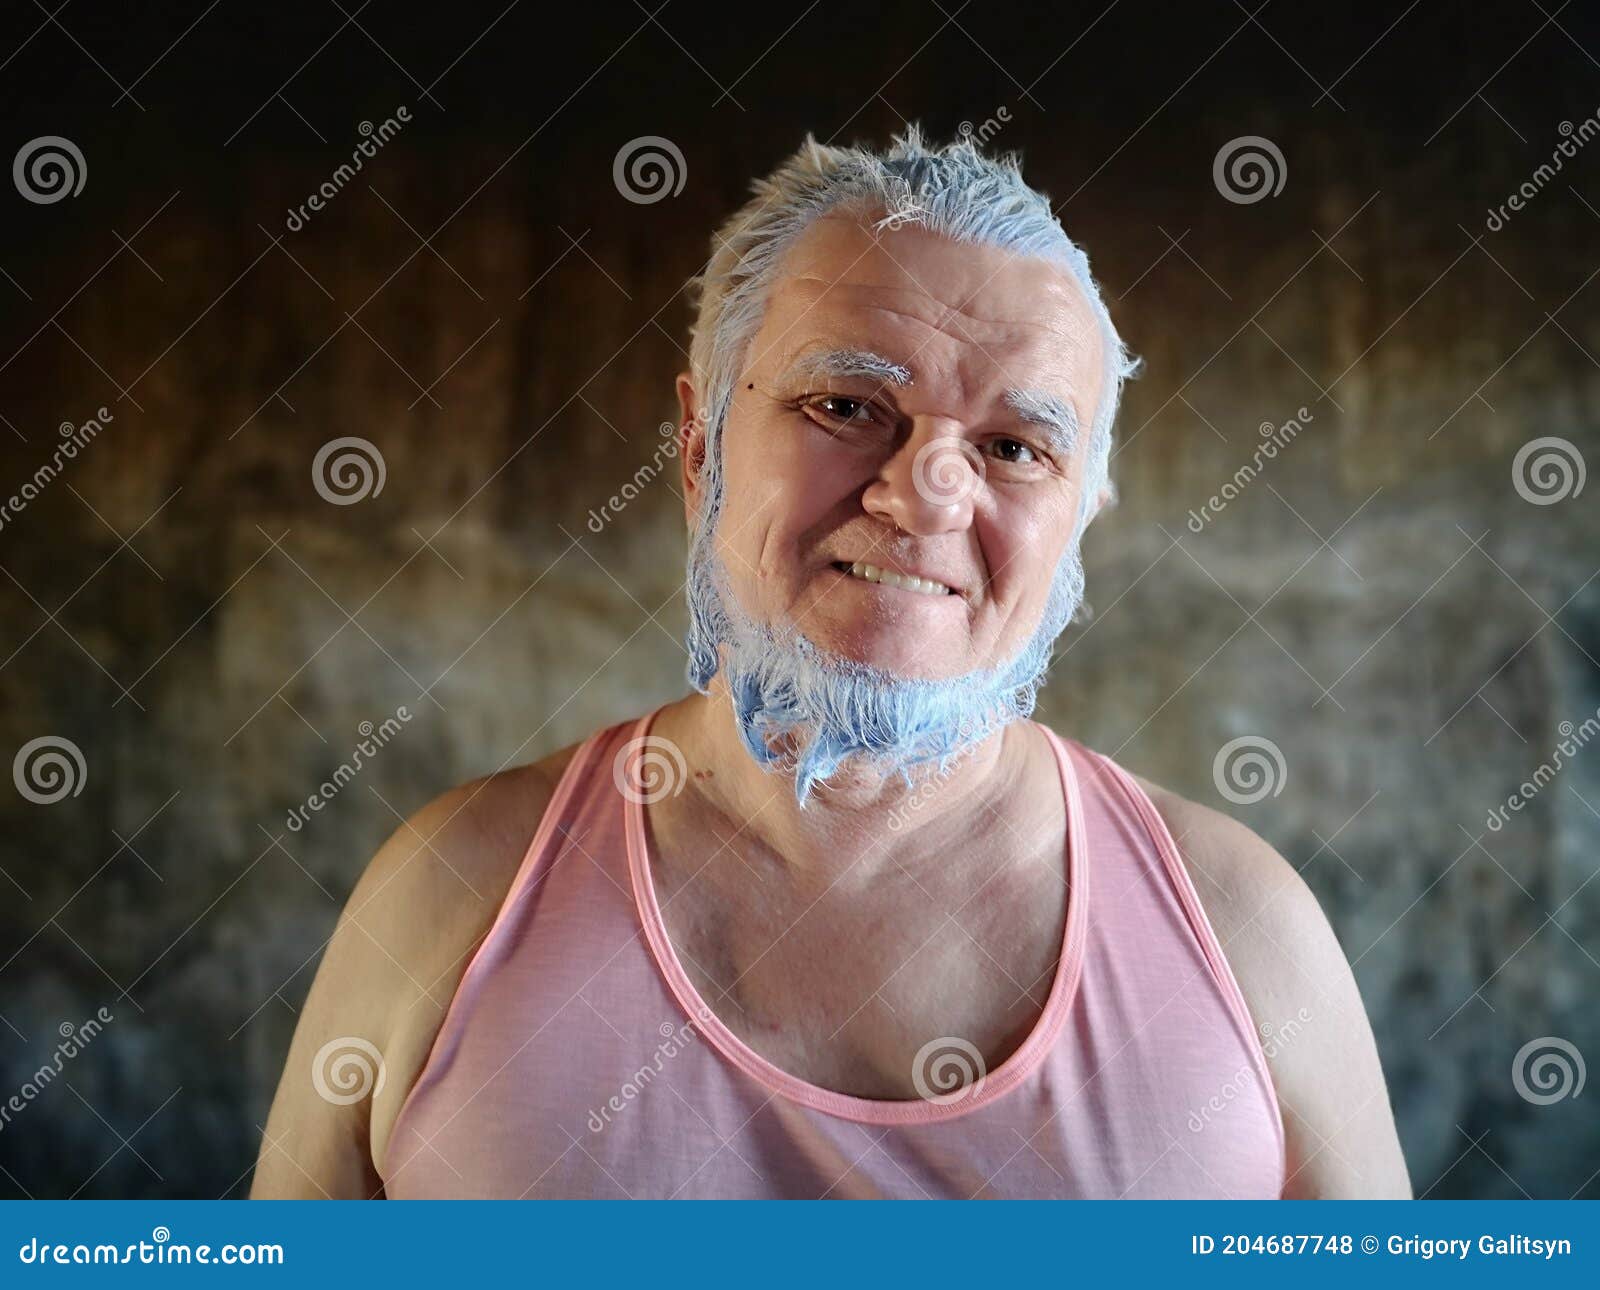 Man with blue hair and beard - wide 6